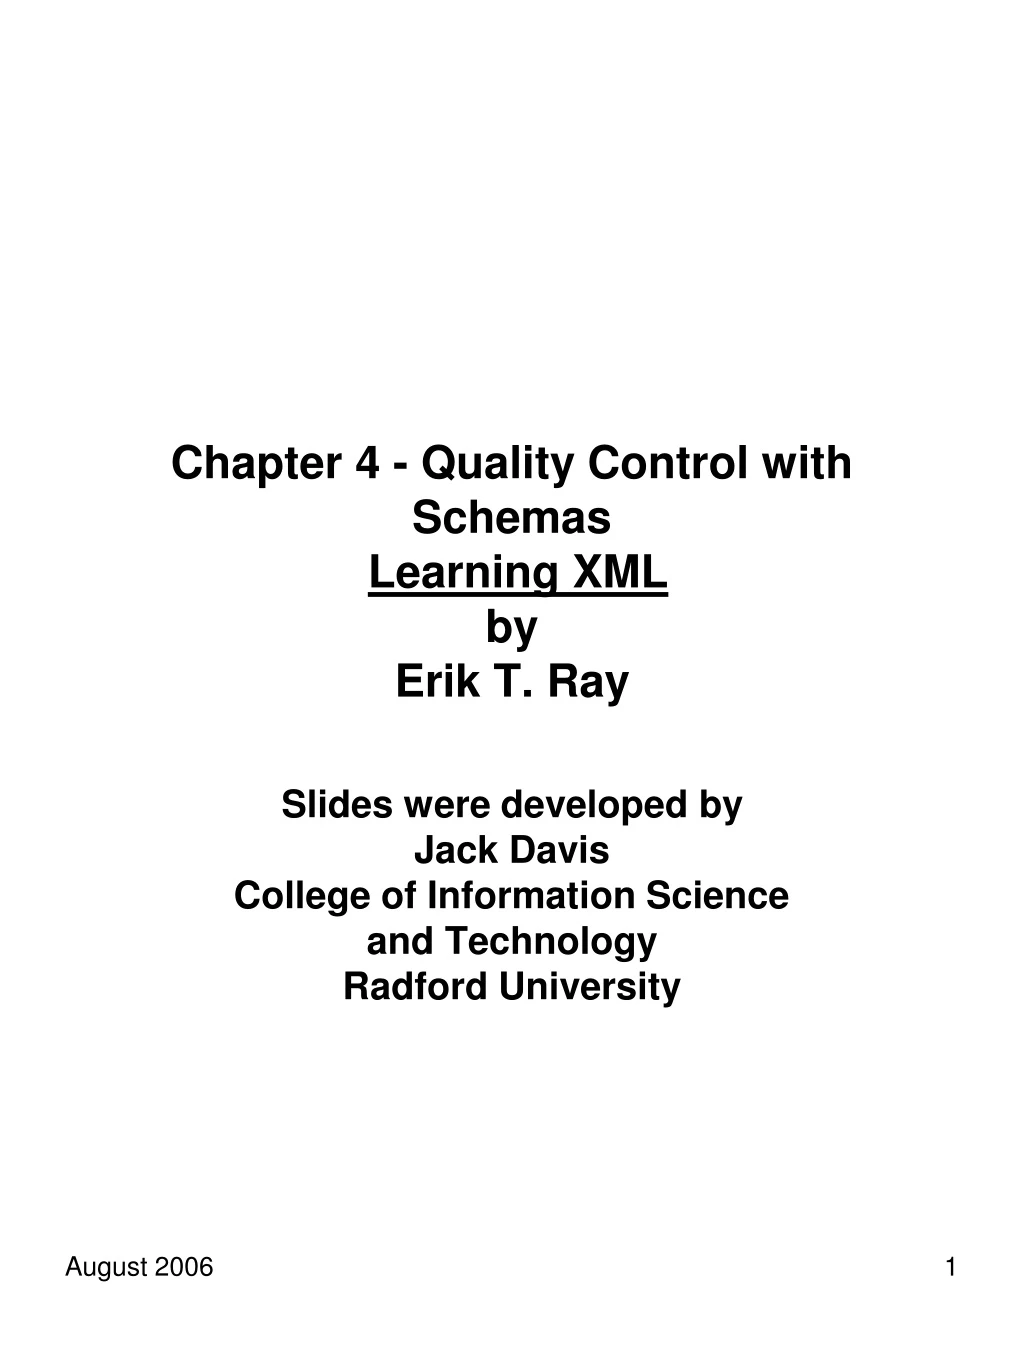 chapter 4 quality control with schemas learning xml by erik t ray